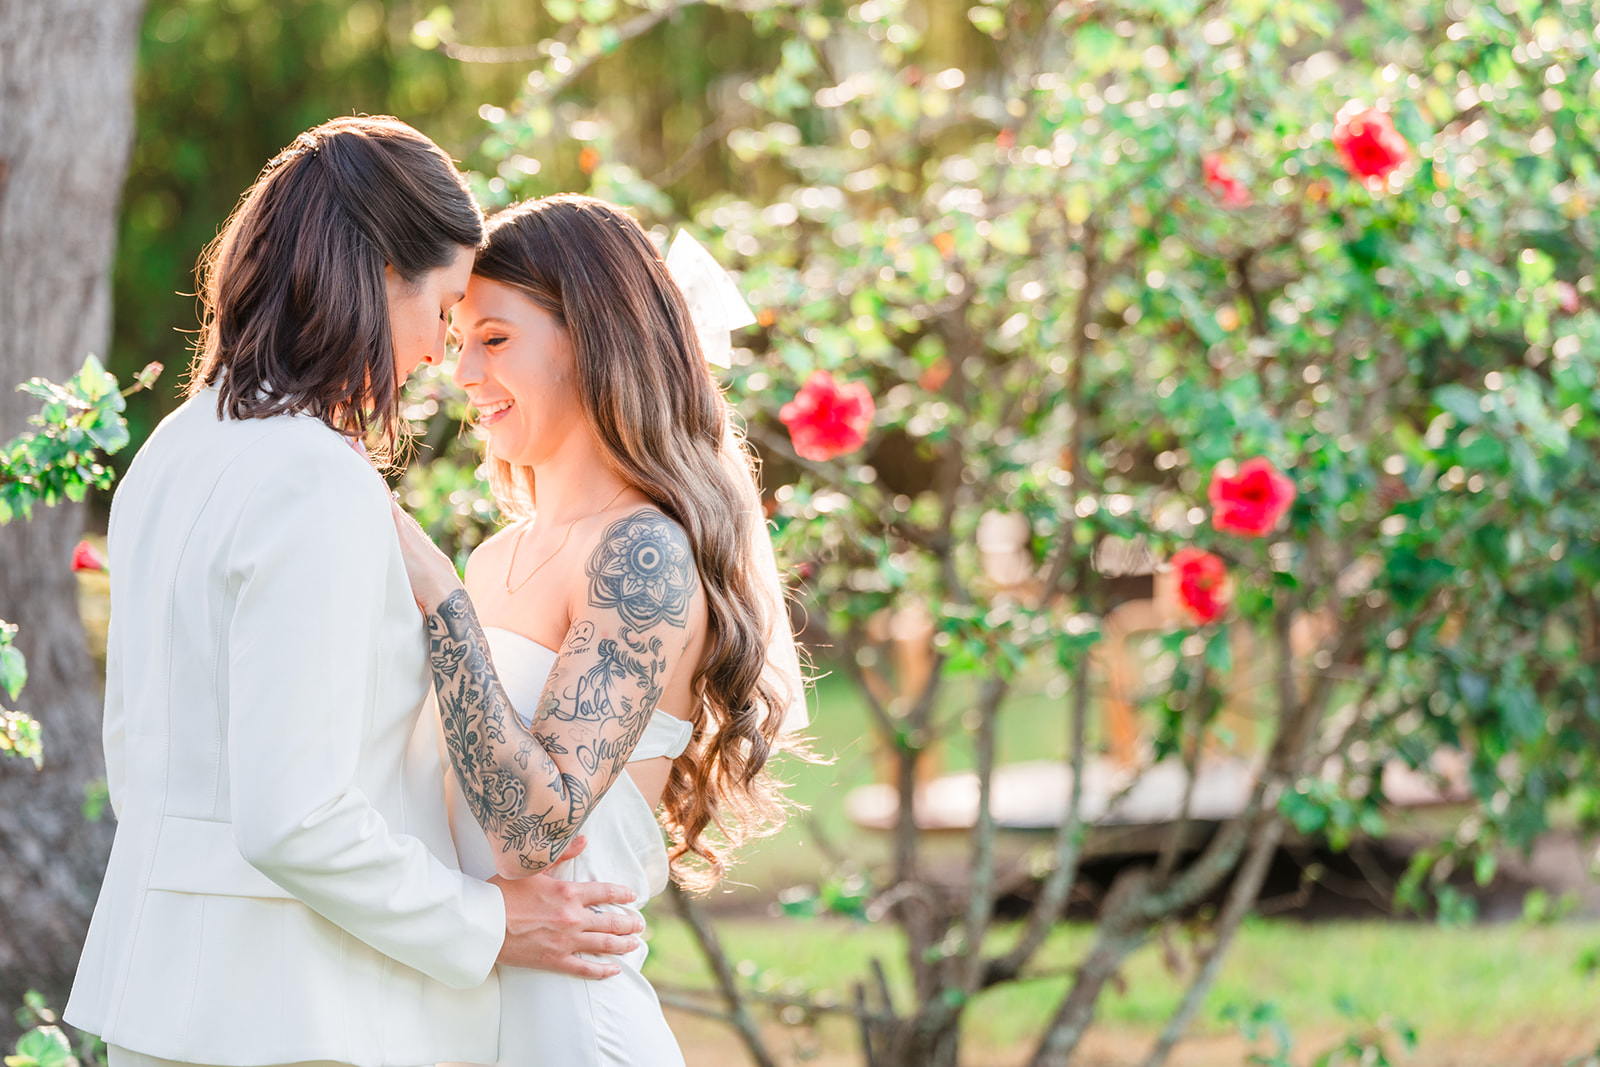 Two brides embrace each other against a stunning natural backdrop, illuminated by perfect lighting, in a captivating photograph.